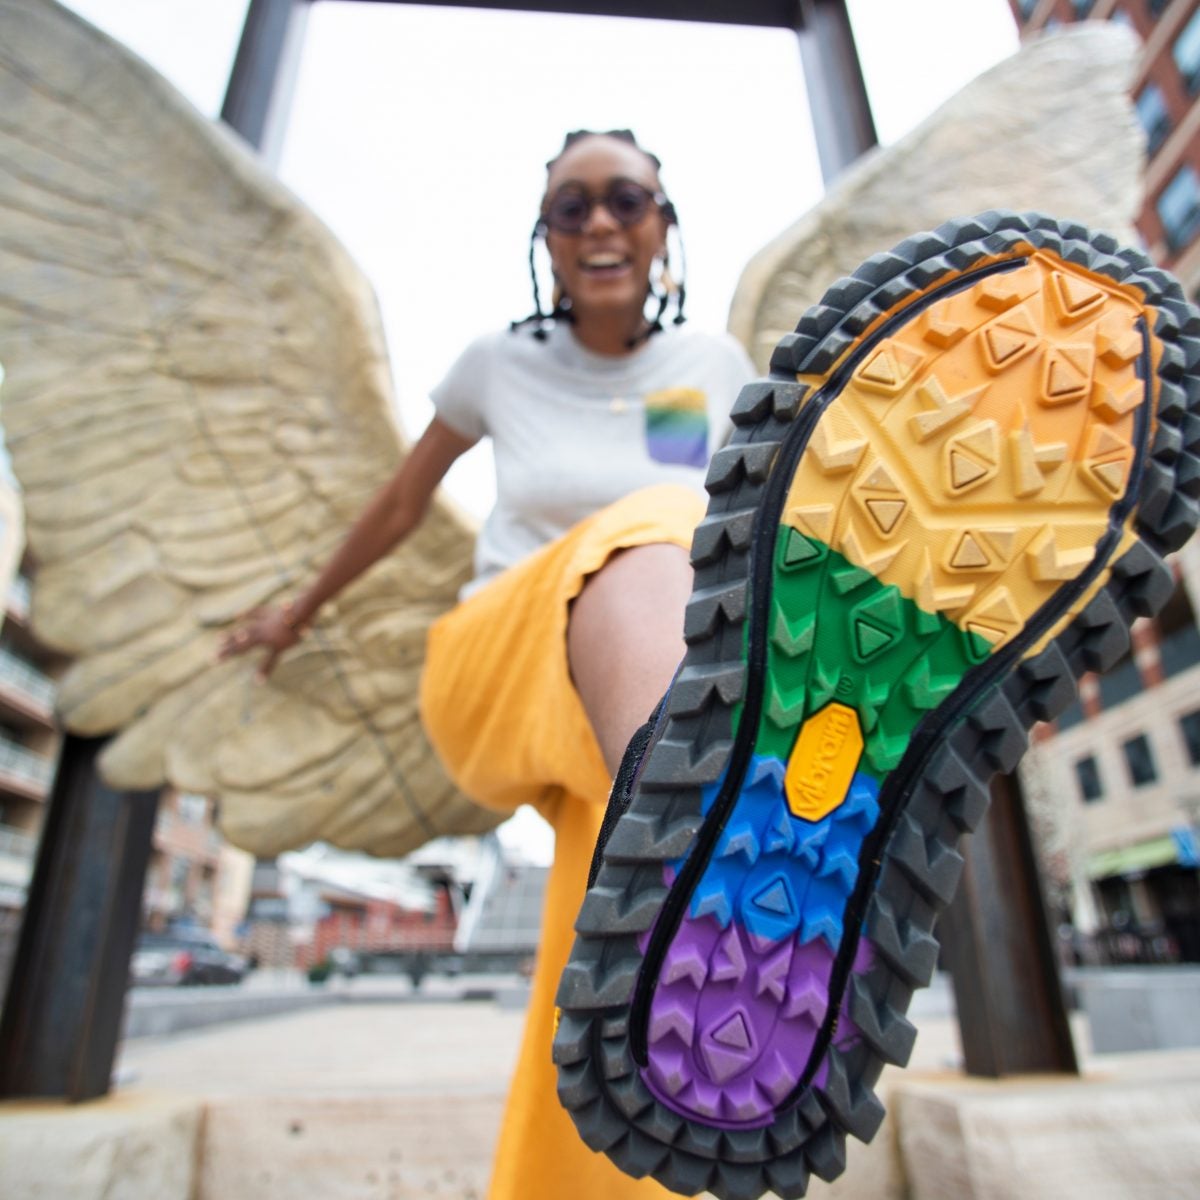 Sporting Brand Merrell Just Redesigned Its Best-Selling Runners With The Help Of This Talented Black Artist